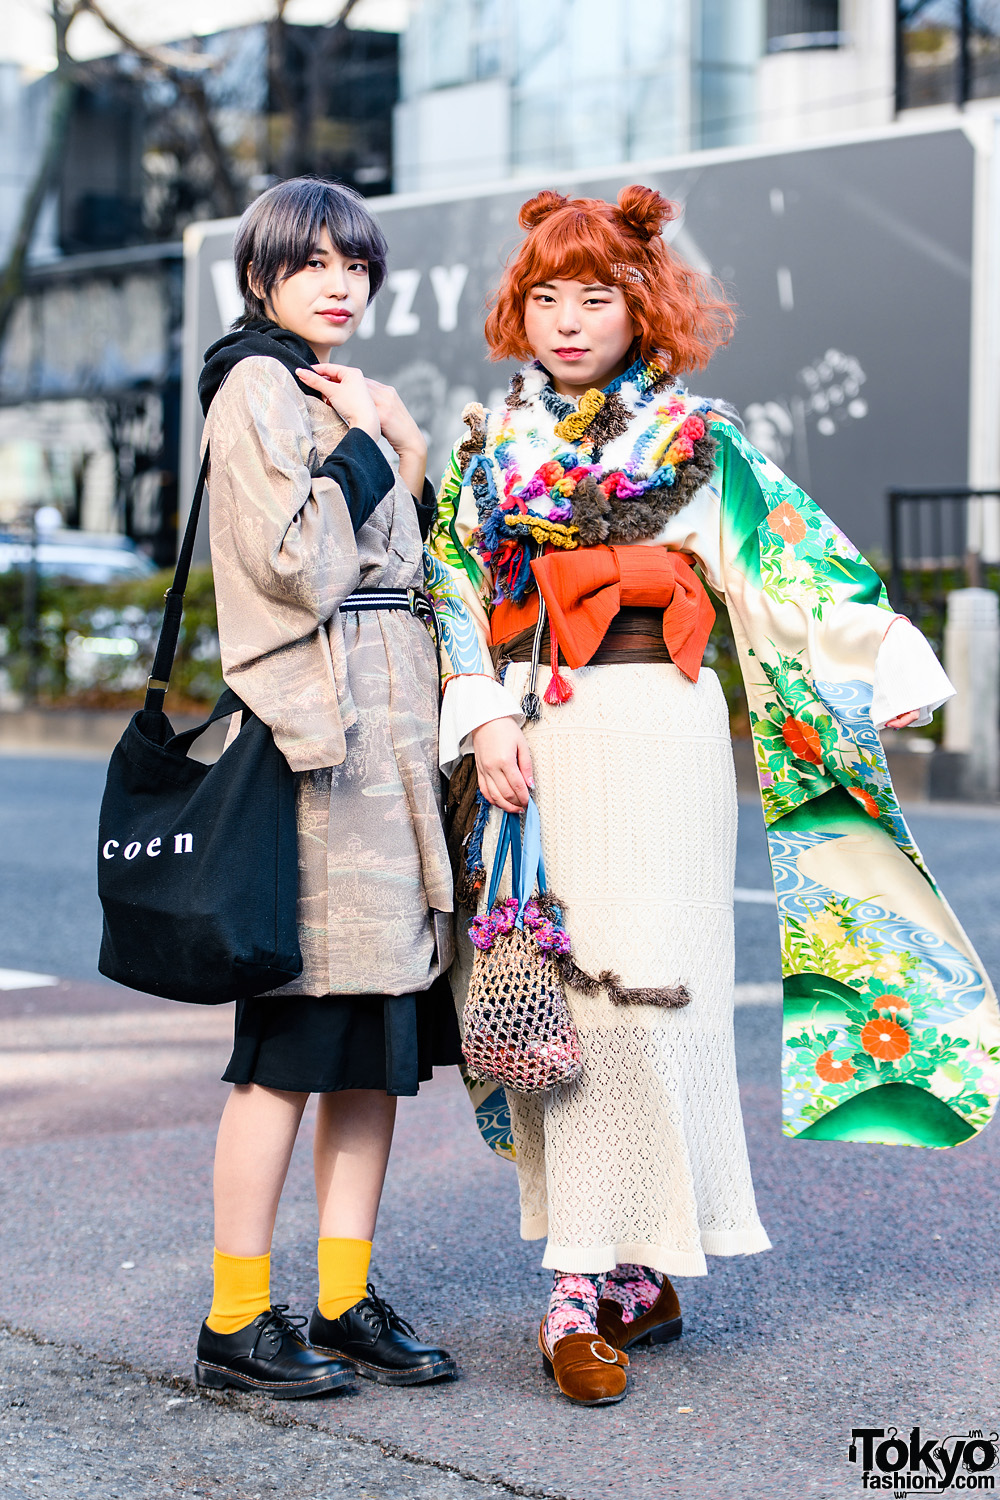 Tokyo Kimono Mix Styles w/  Twin Buns, Short Bob, Uniqlo Hoodie Jacket, GU Skirt, Handmade Fashion, Coen Bag, Pointy Suede Loafers & Lace-Up Leather Shoes